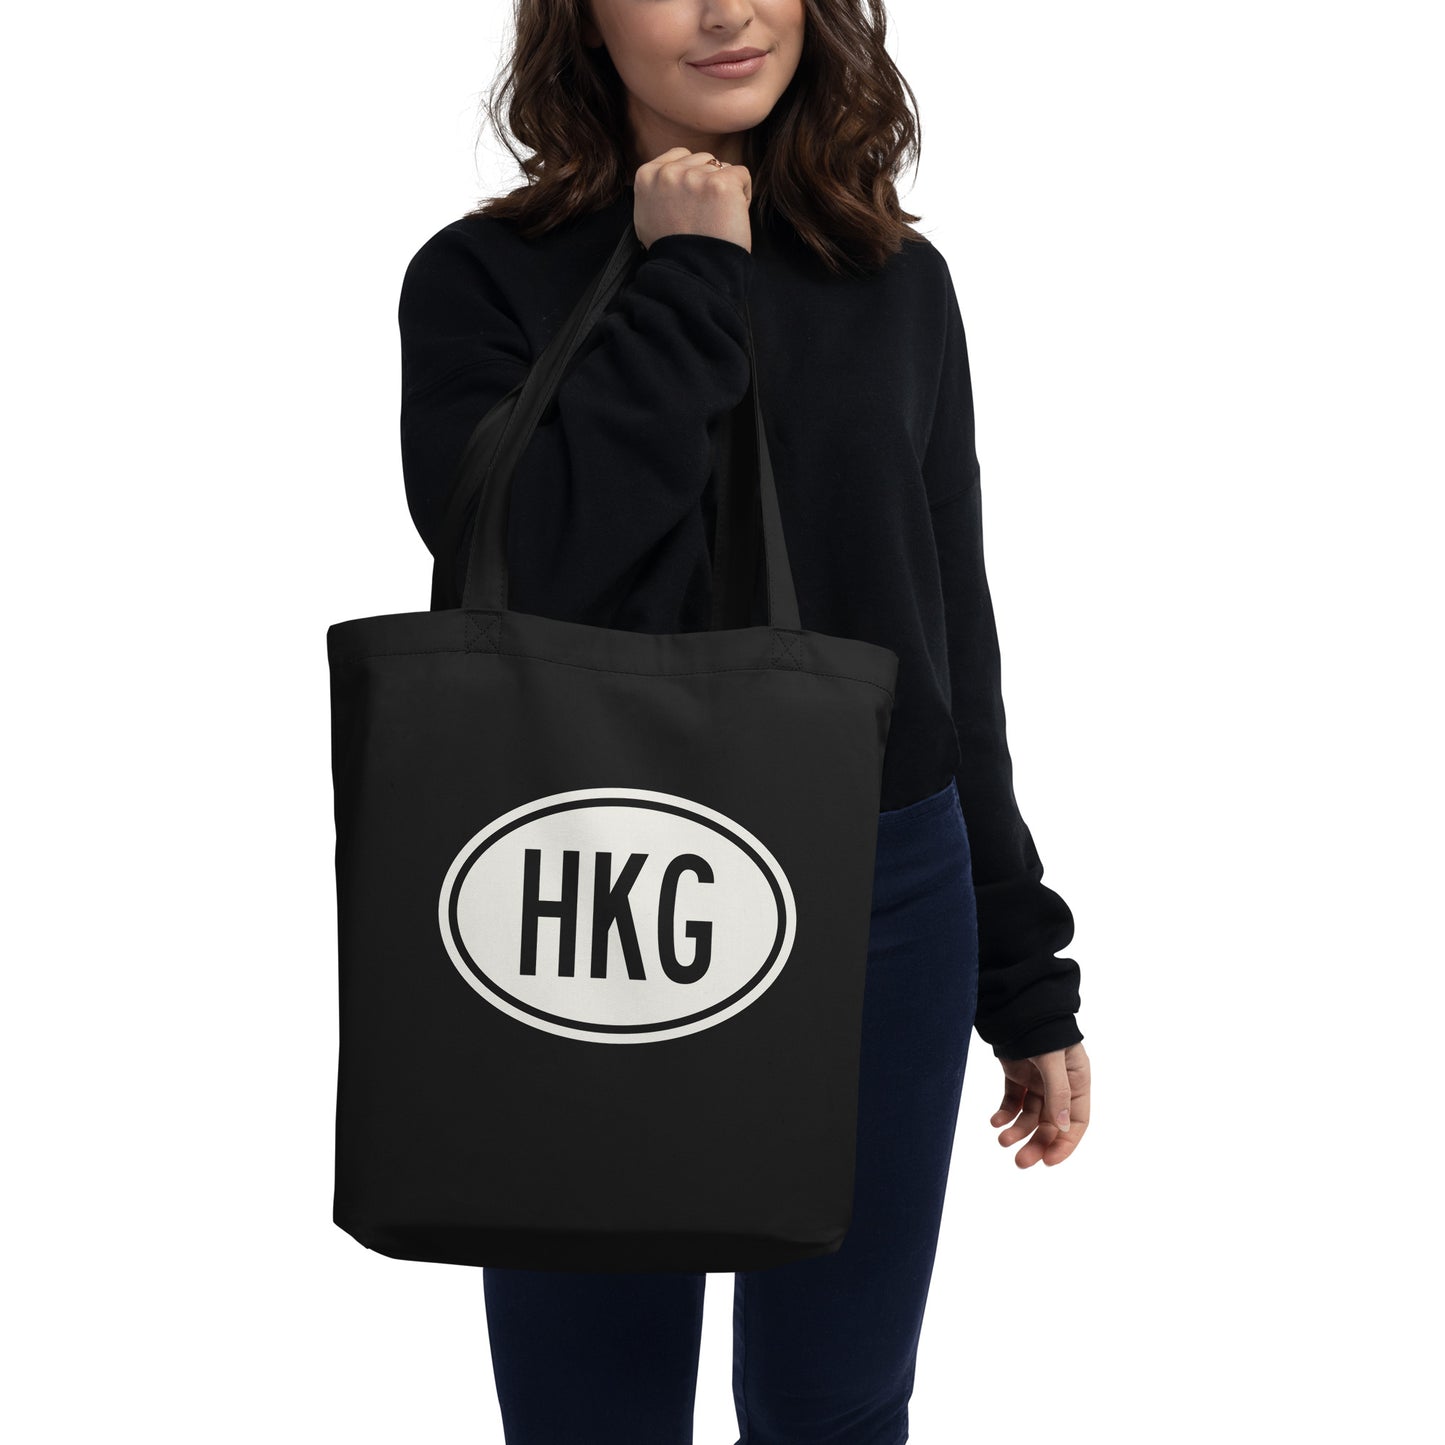 Unique Travel Gift Organic Tote - White Oval • HKG Hong Kong • YHM Designs - Image 03